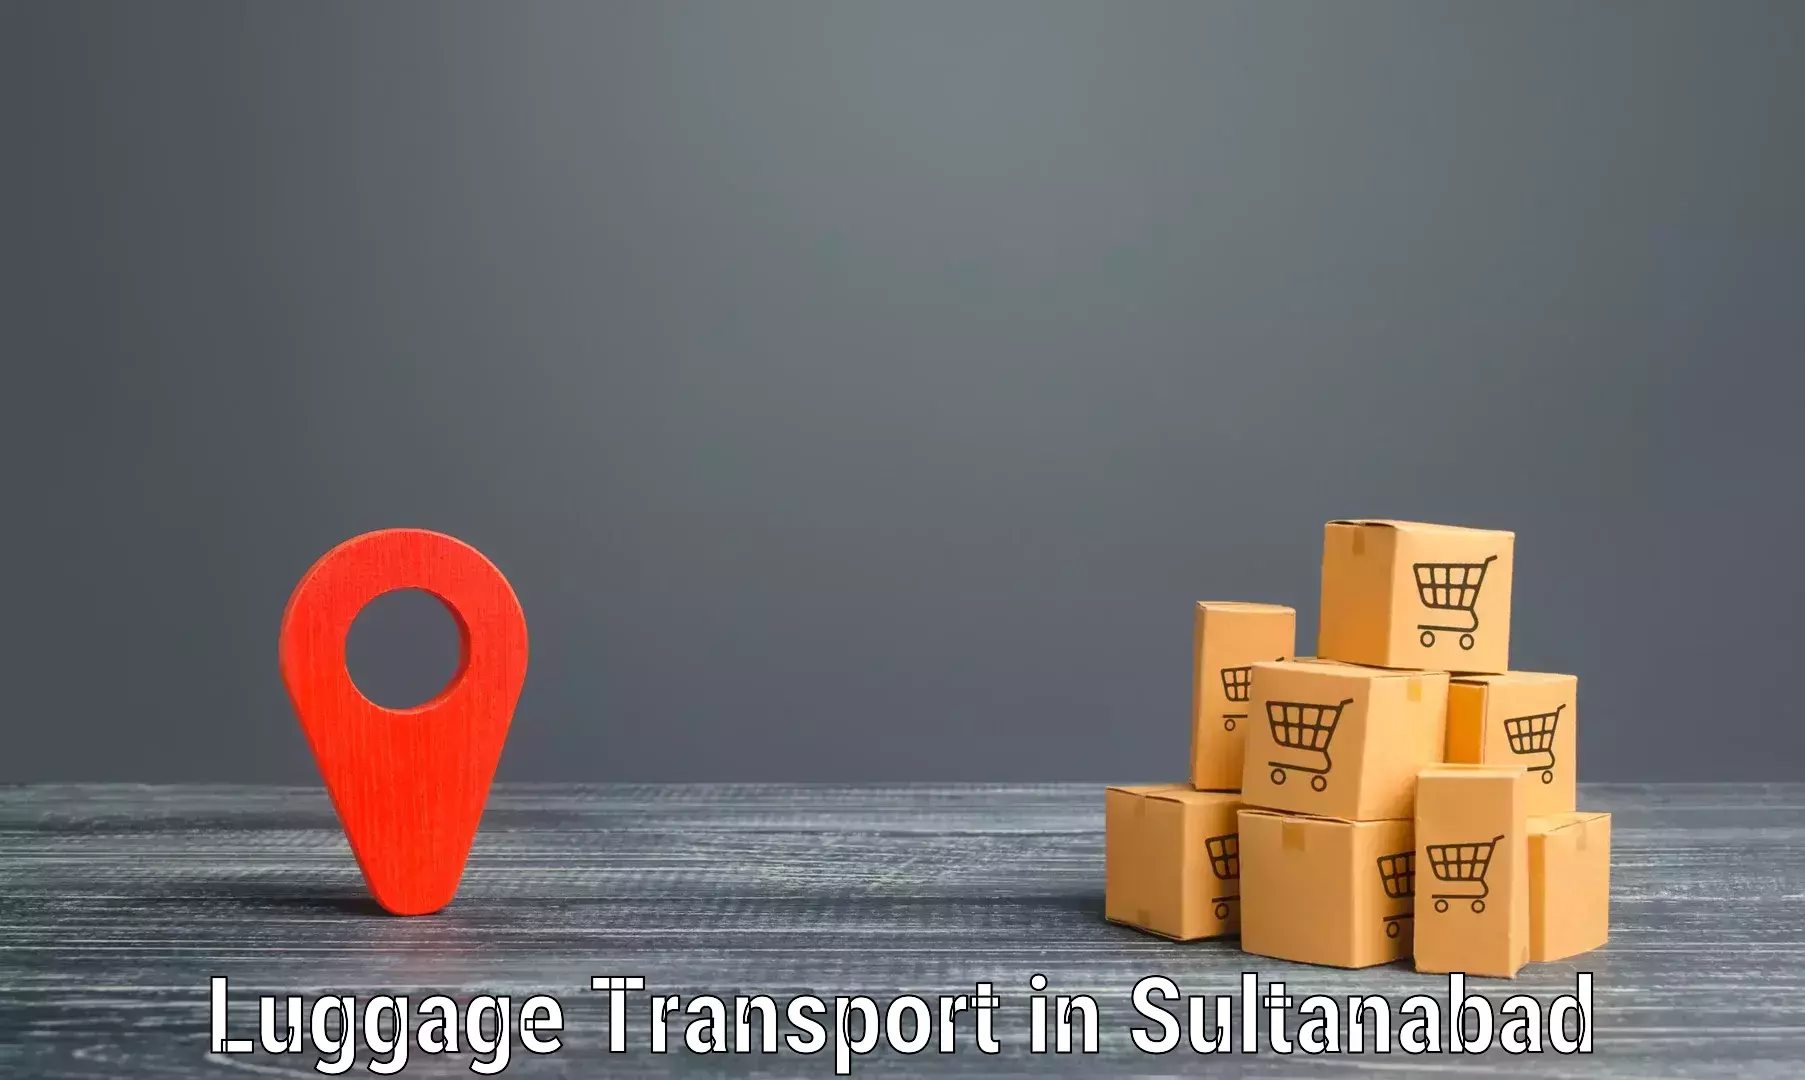 Baggage transport coordination in Sultanabad